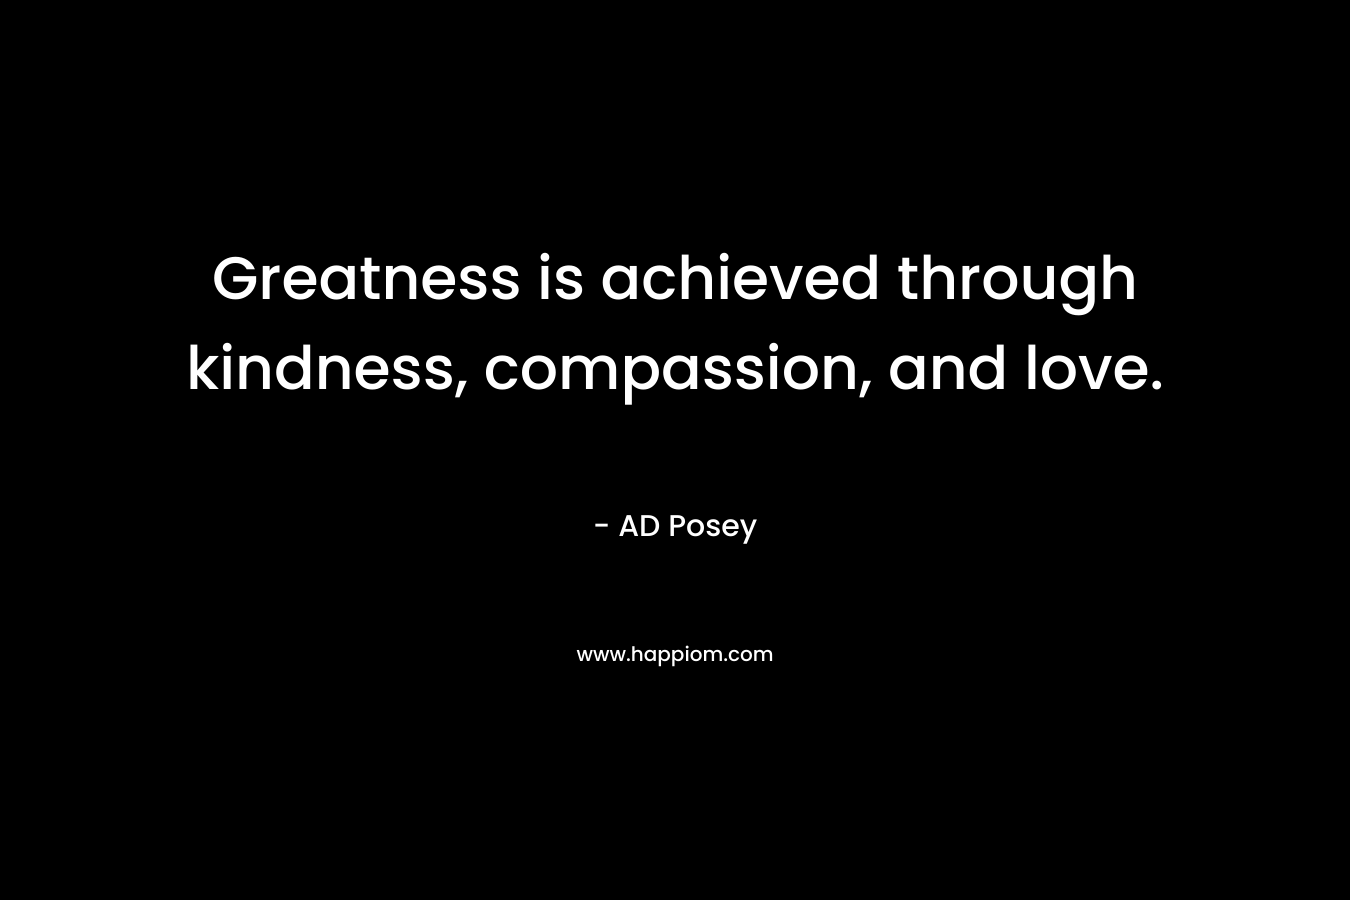 Greatness is achieved through kindness, compassion, and love.